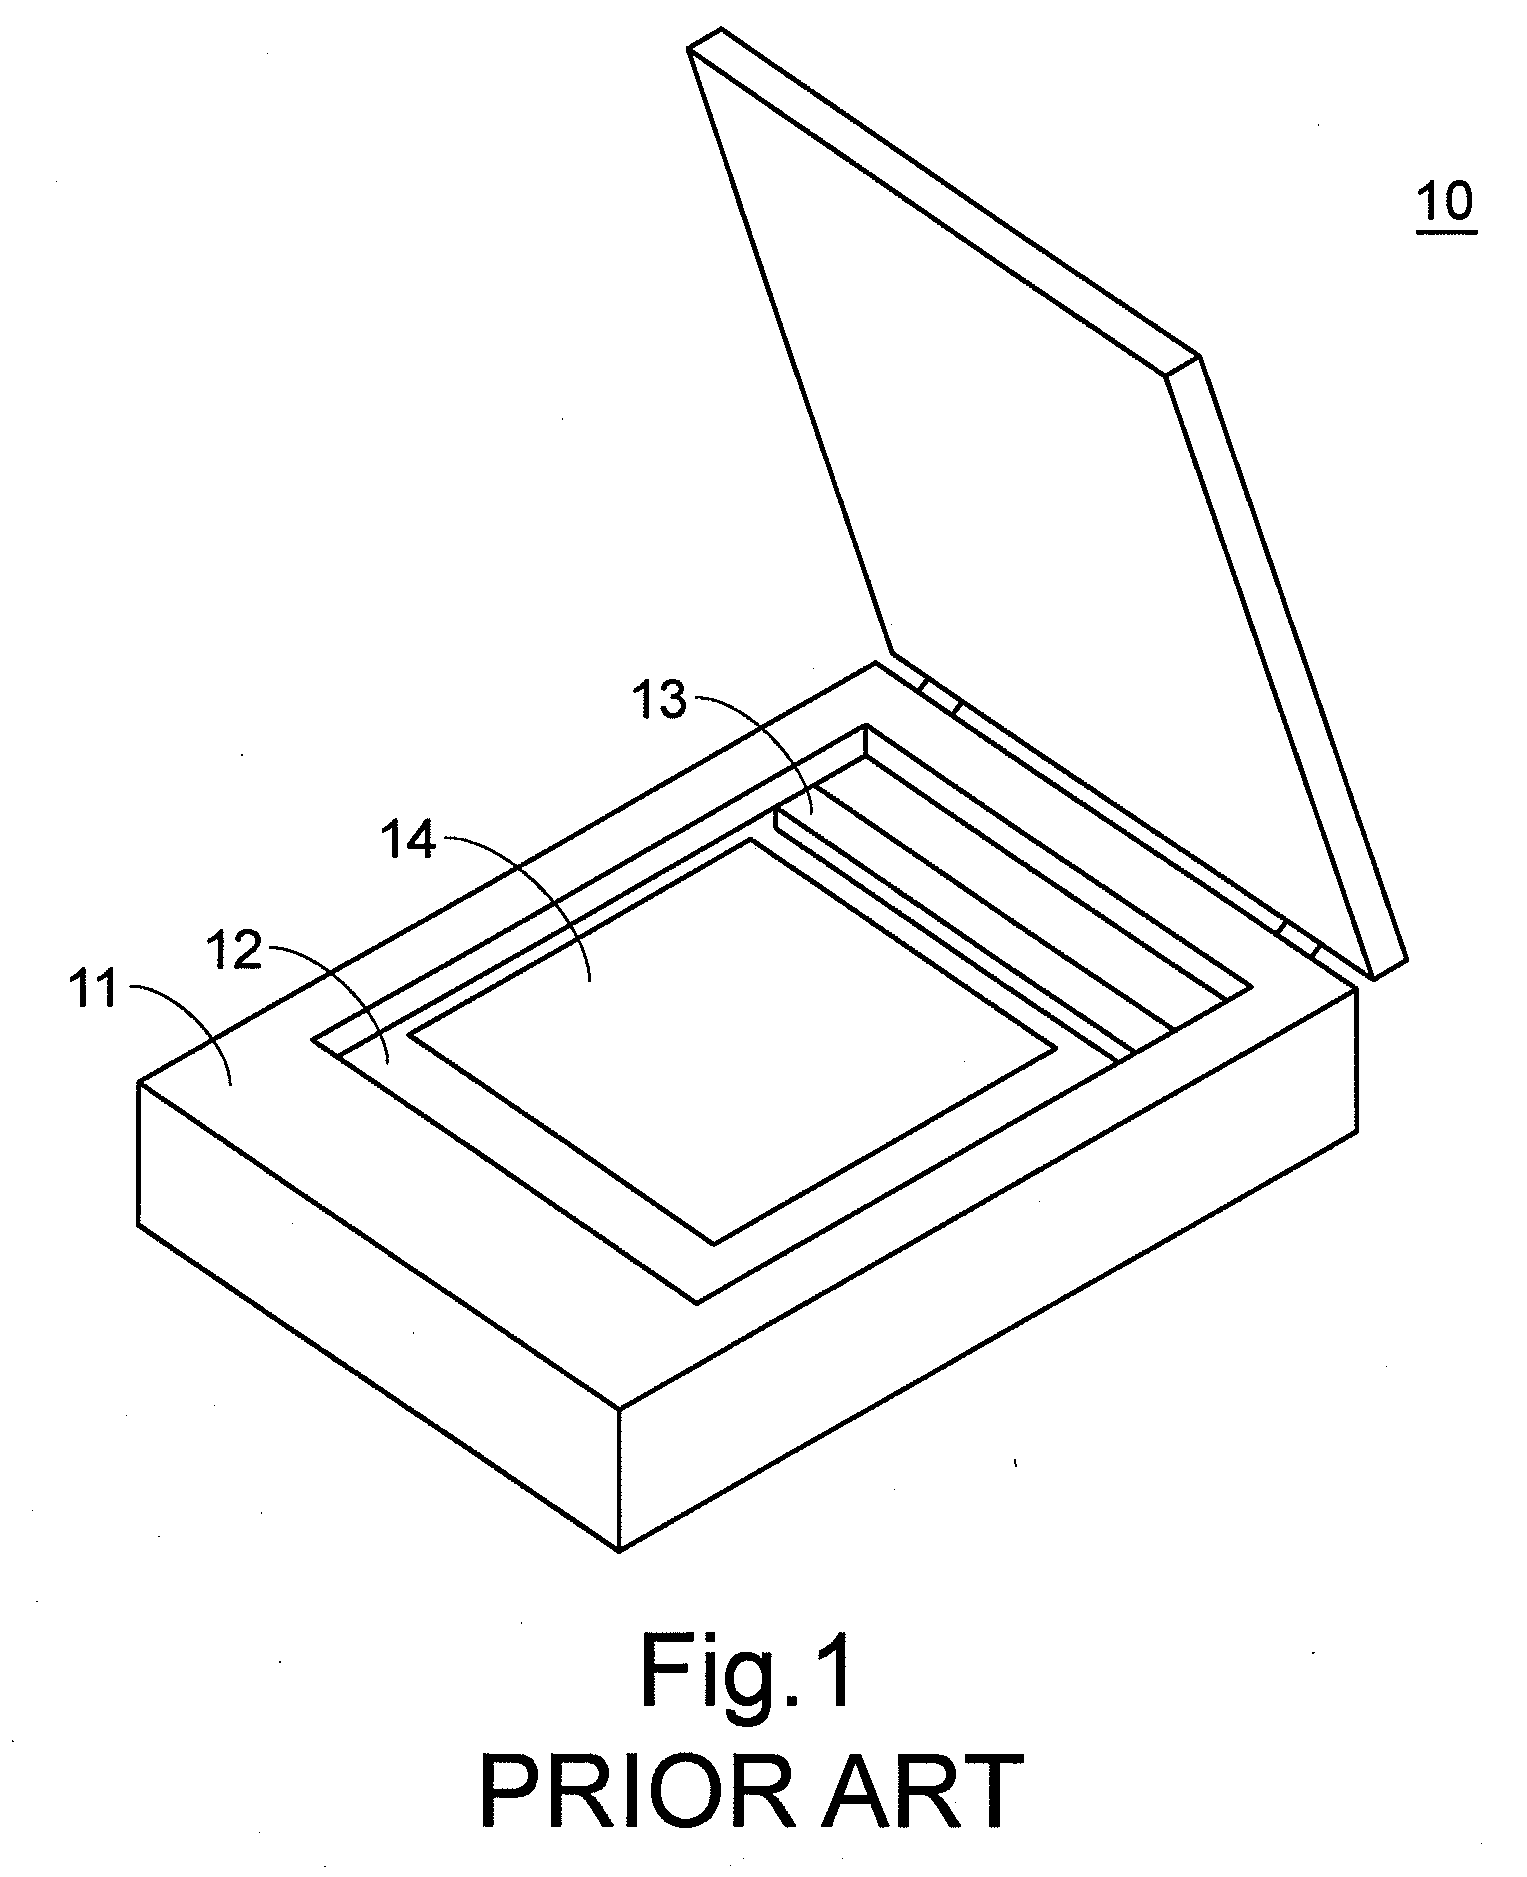 Contact image sensor for generating multi-resolutions